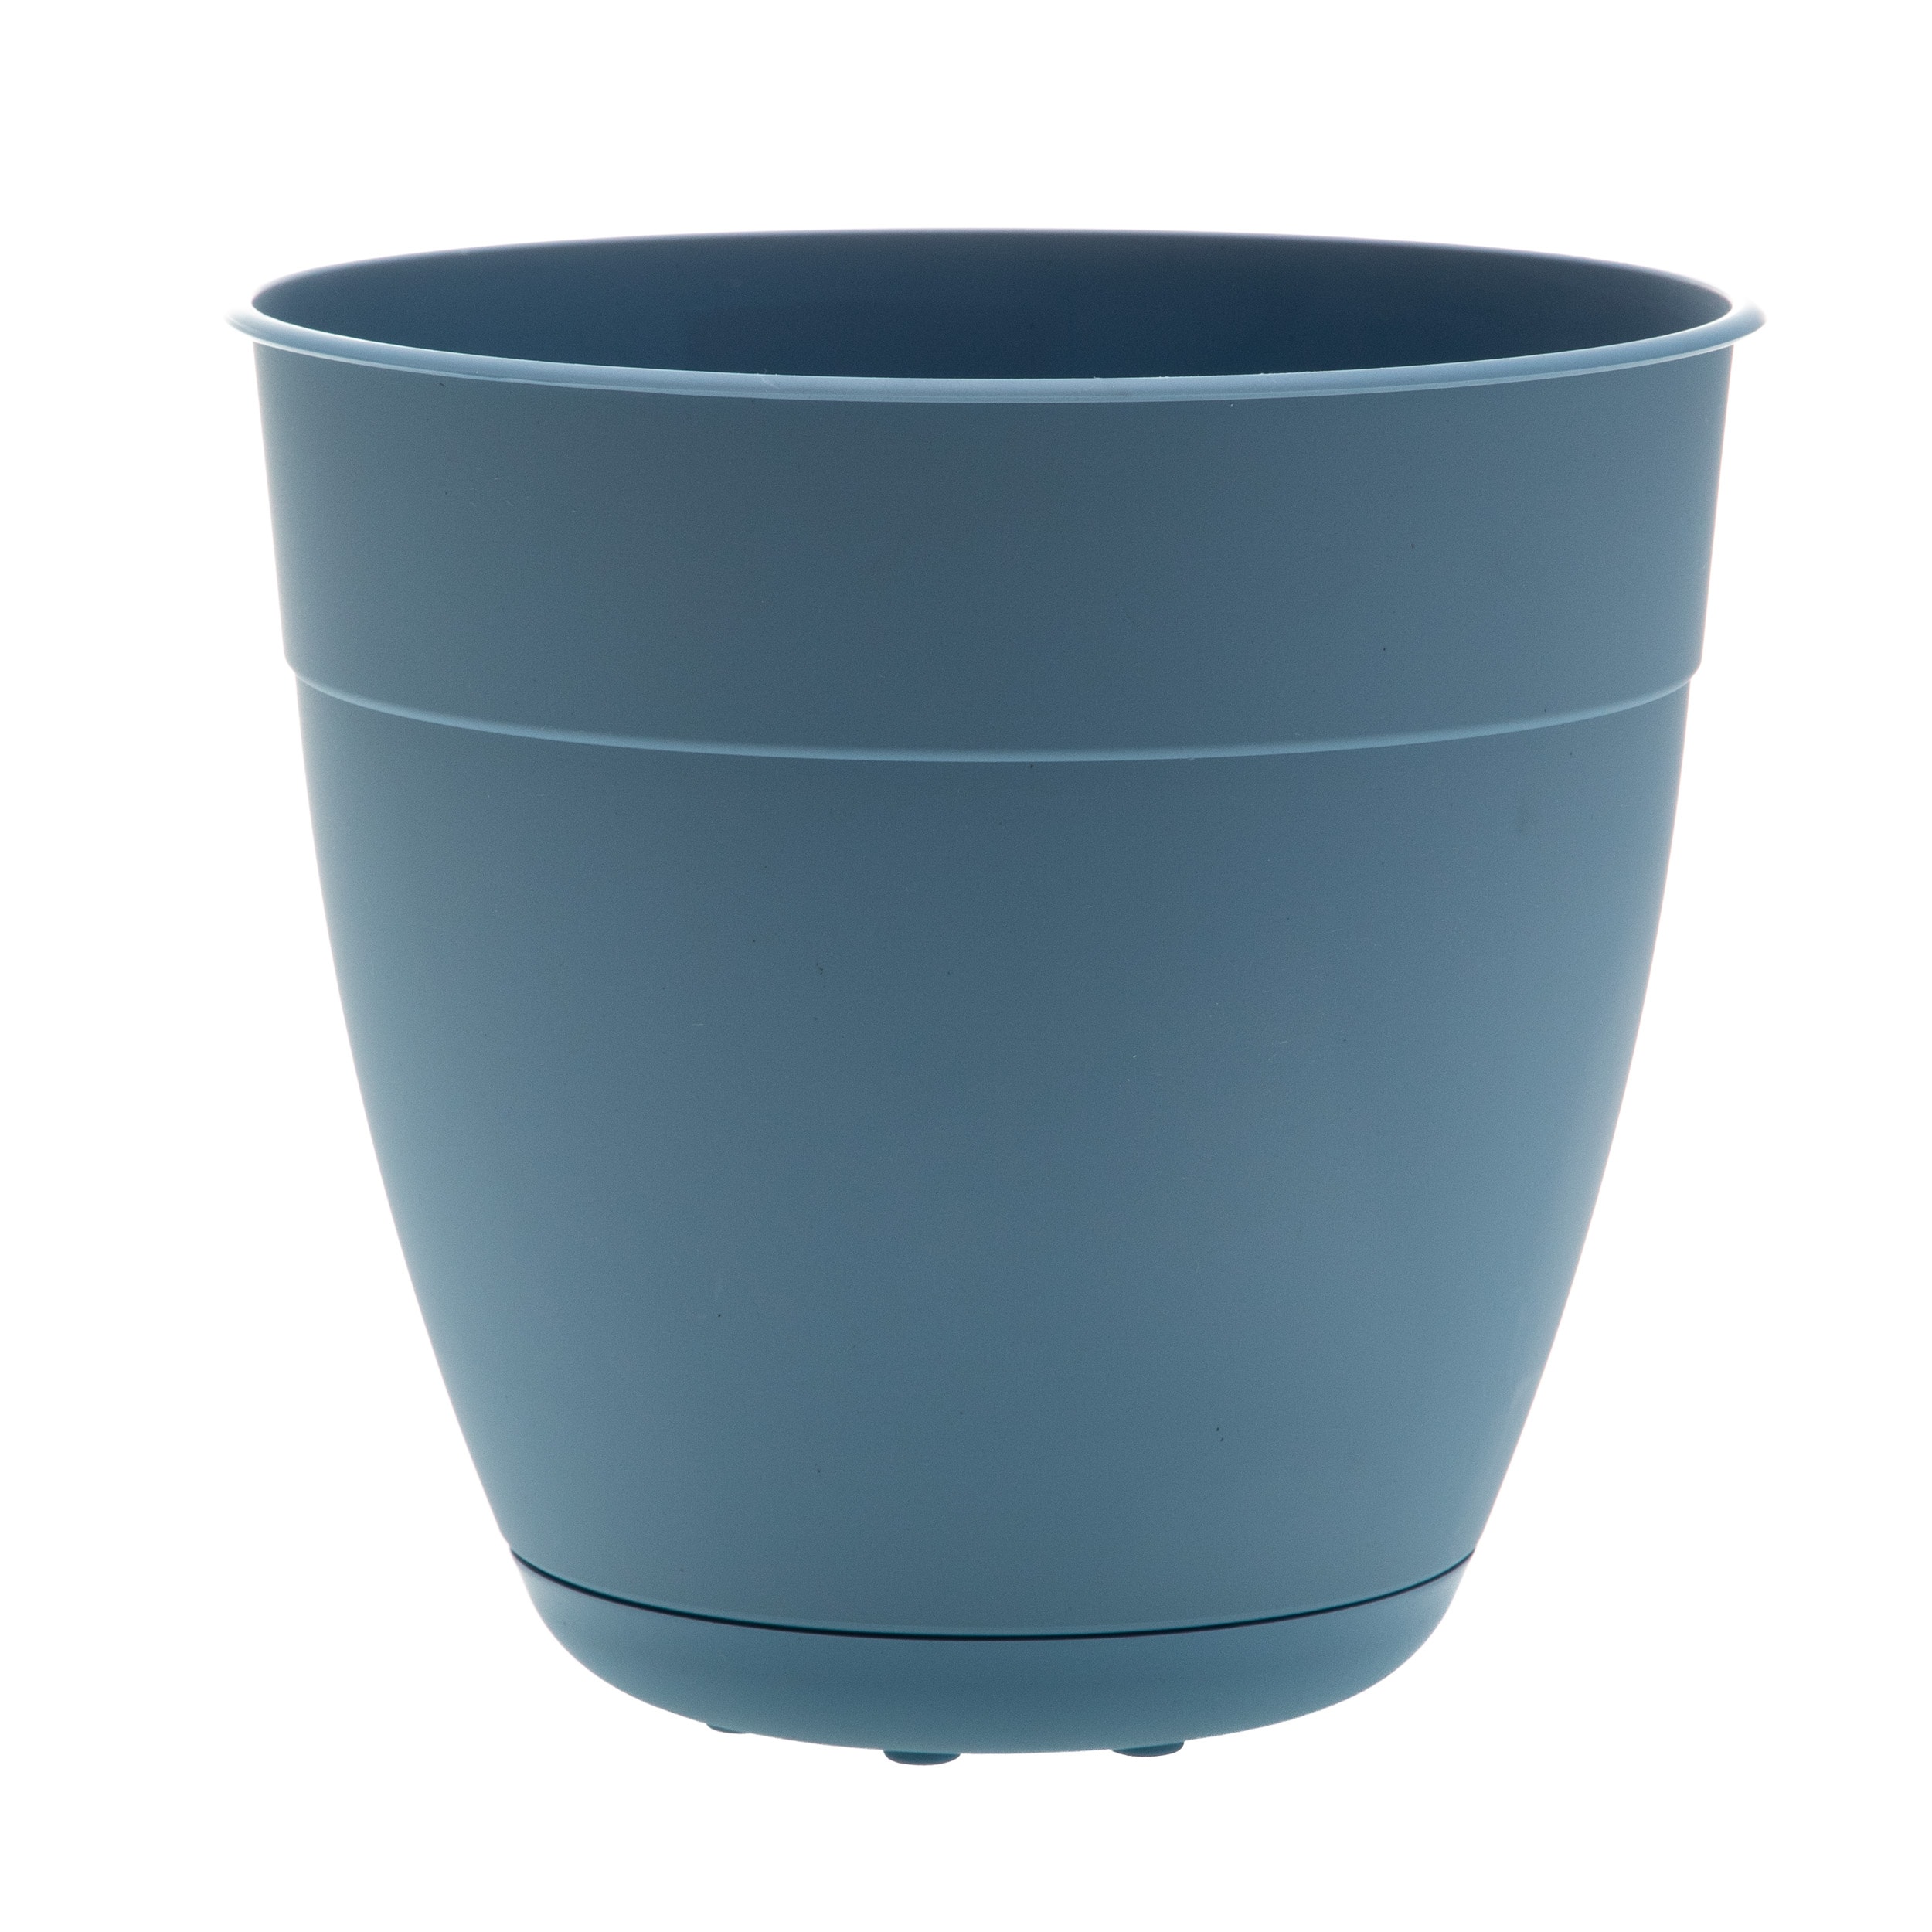 Cater kwartaal Fruitig Blue Pots & Planters at Lowes.com